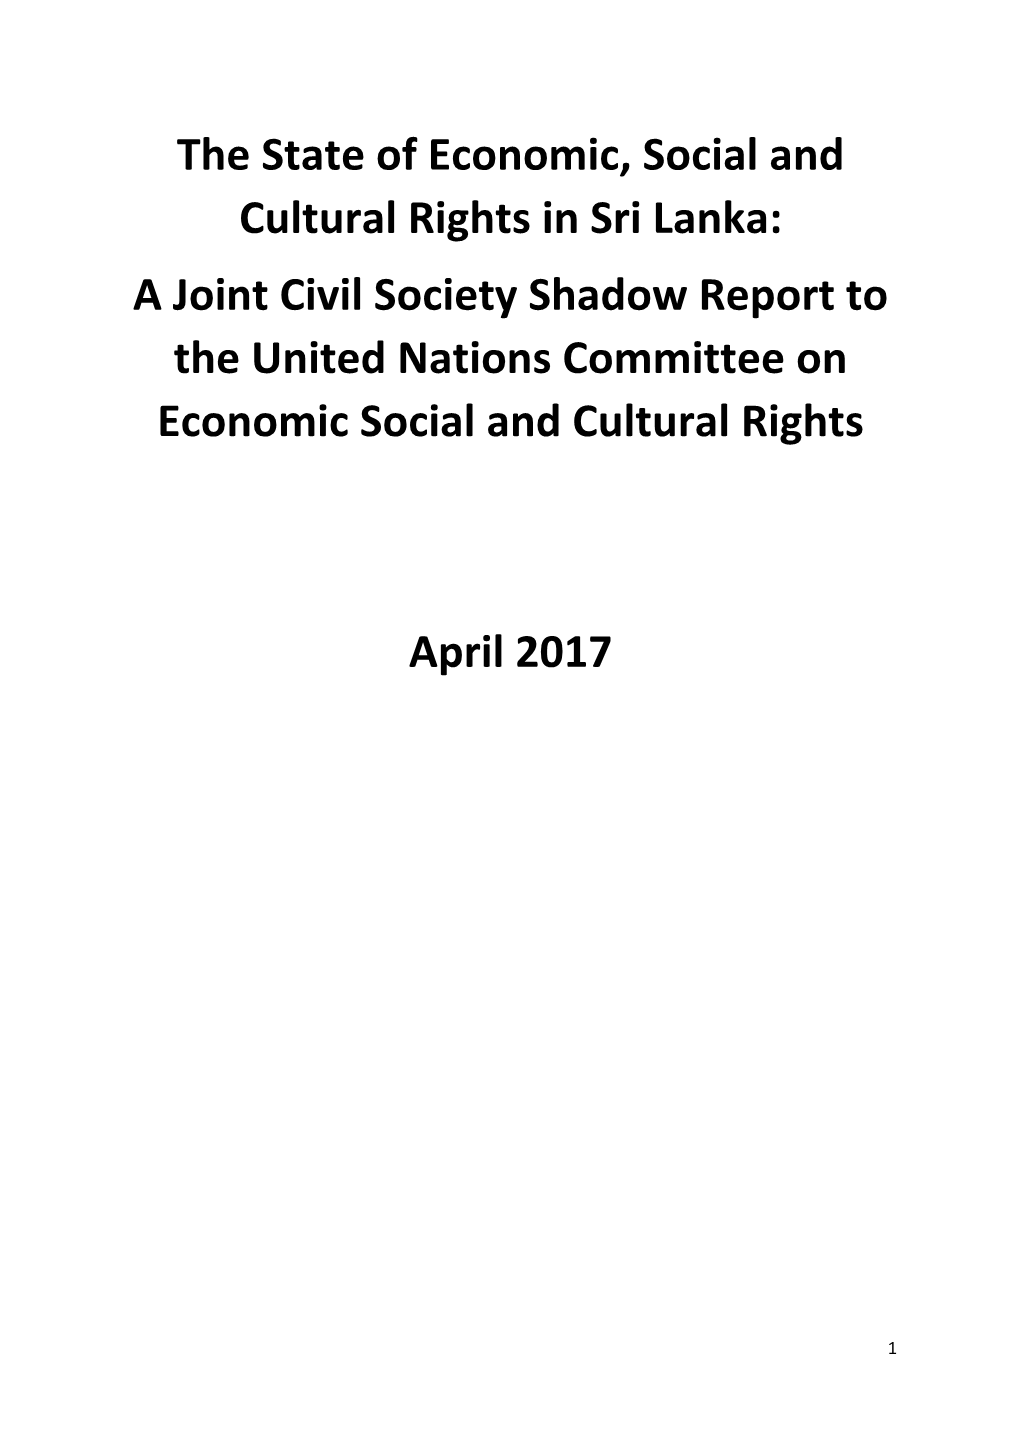 The State of Economic, Social and Cultural Rights in Sri Lanka: a Joint